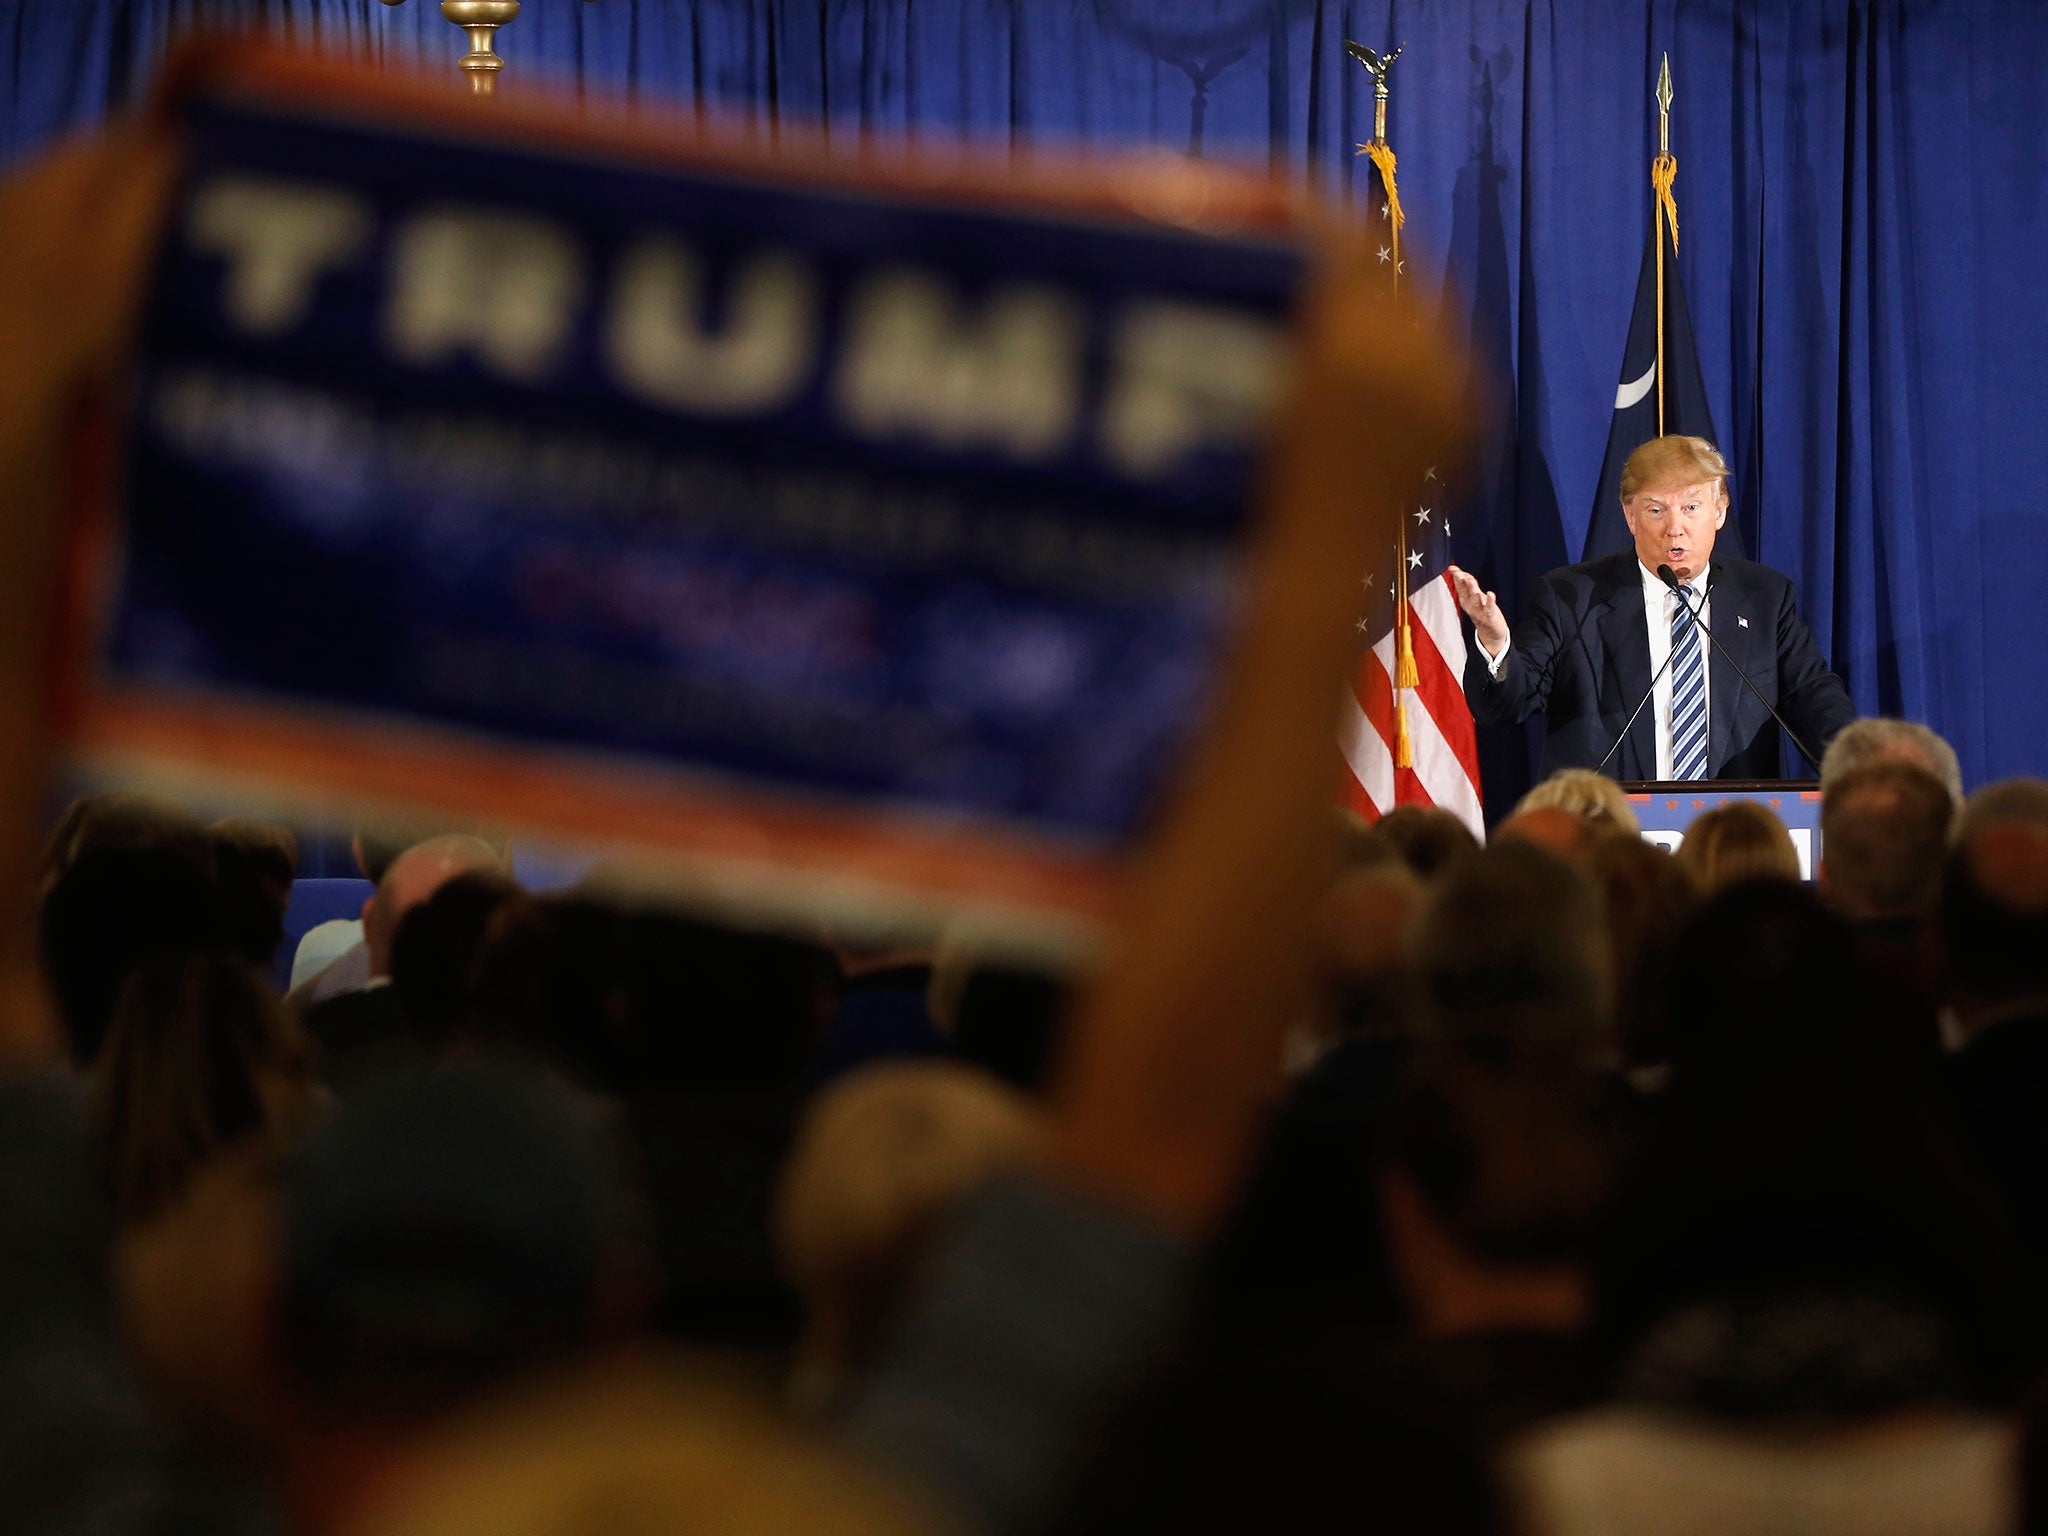 Republican presidential candidate Donald Trump speaks during a campaign stop in Kiawah Island